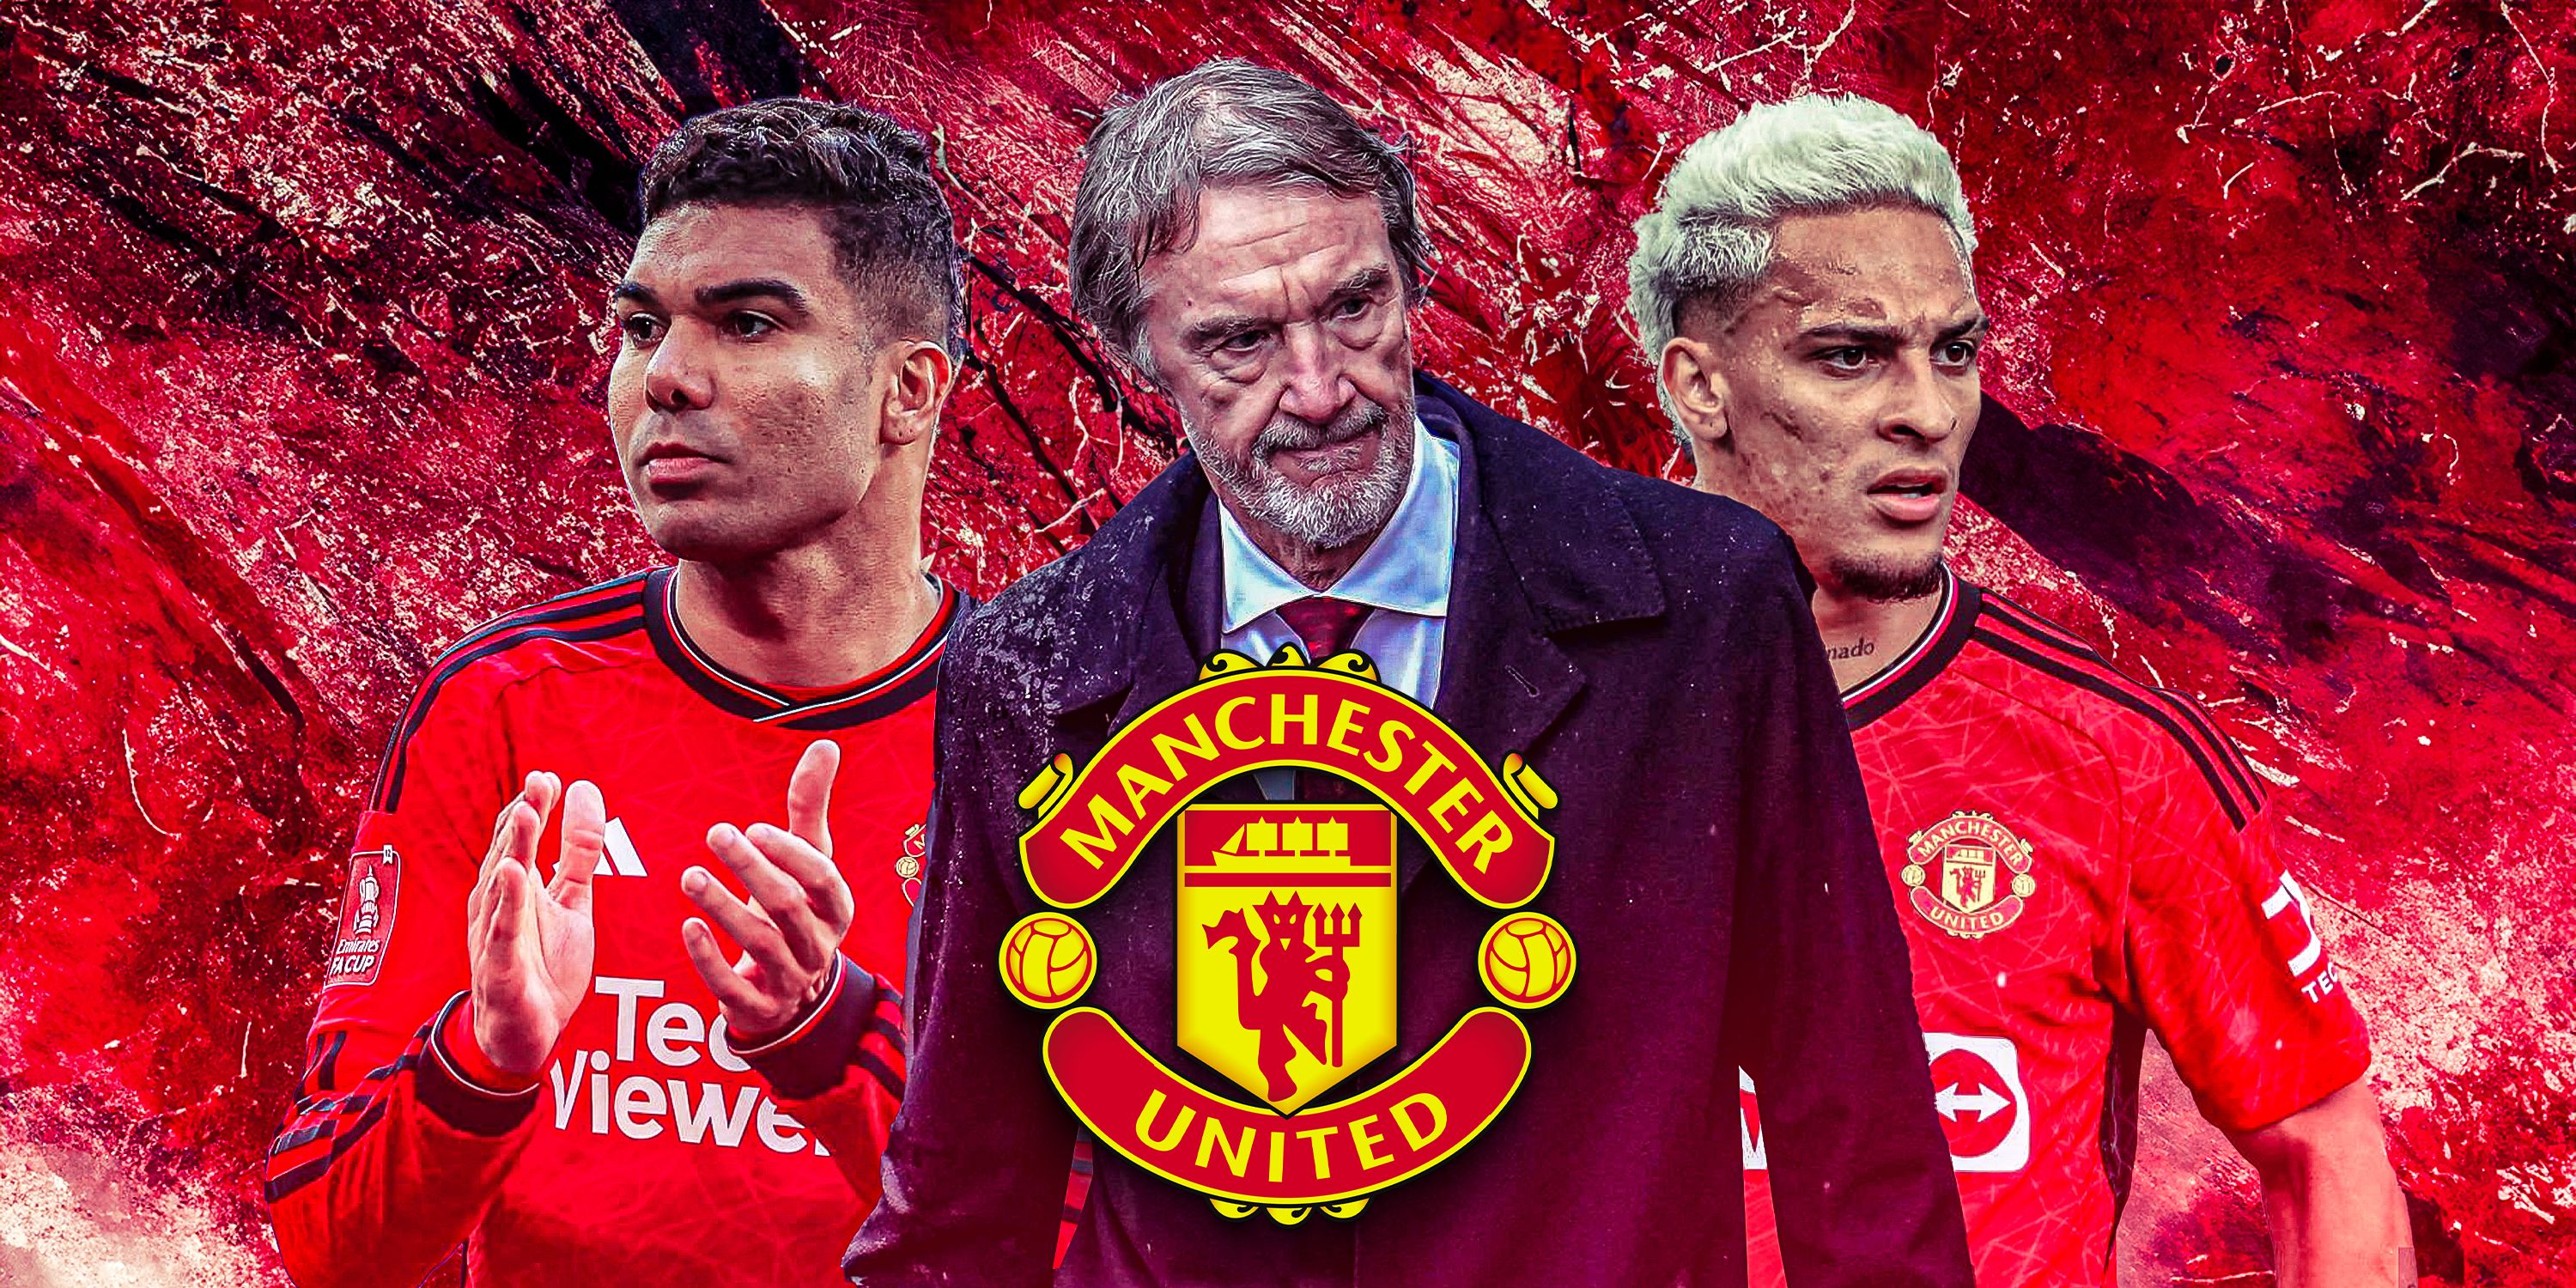 Sir Jim Ratcliffe on one side with Antony and Casemiro to one side plus Man Utd badge